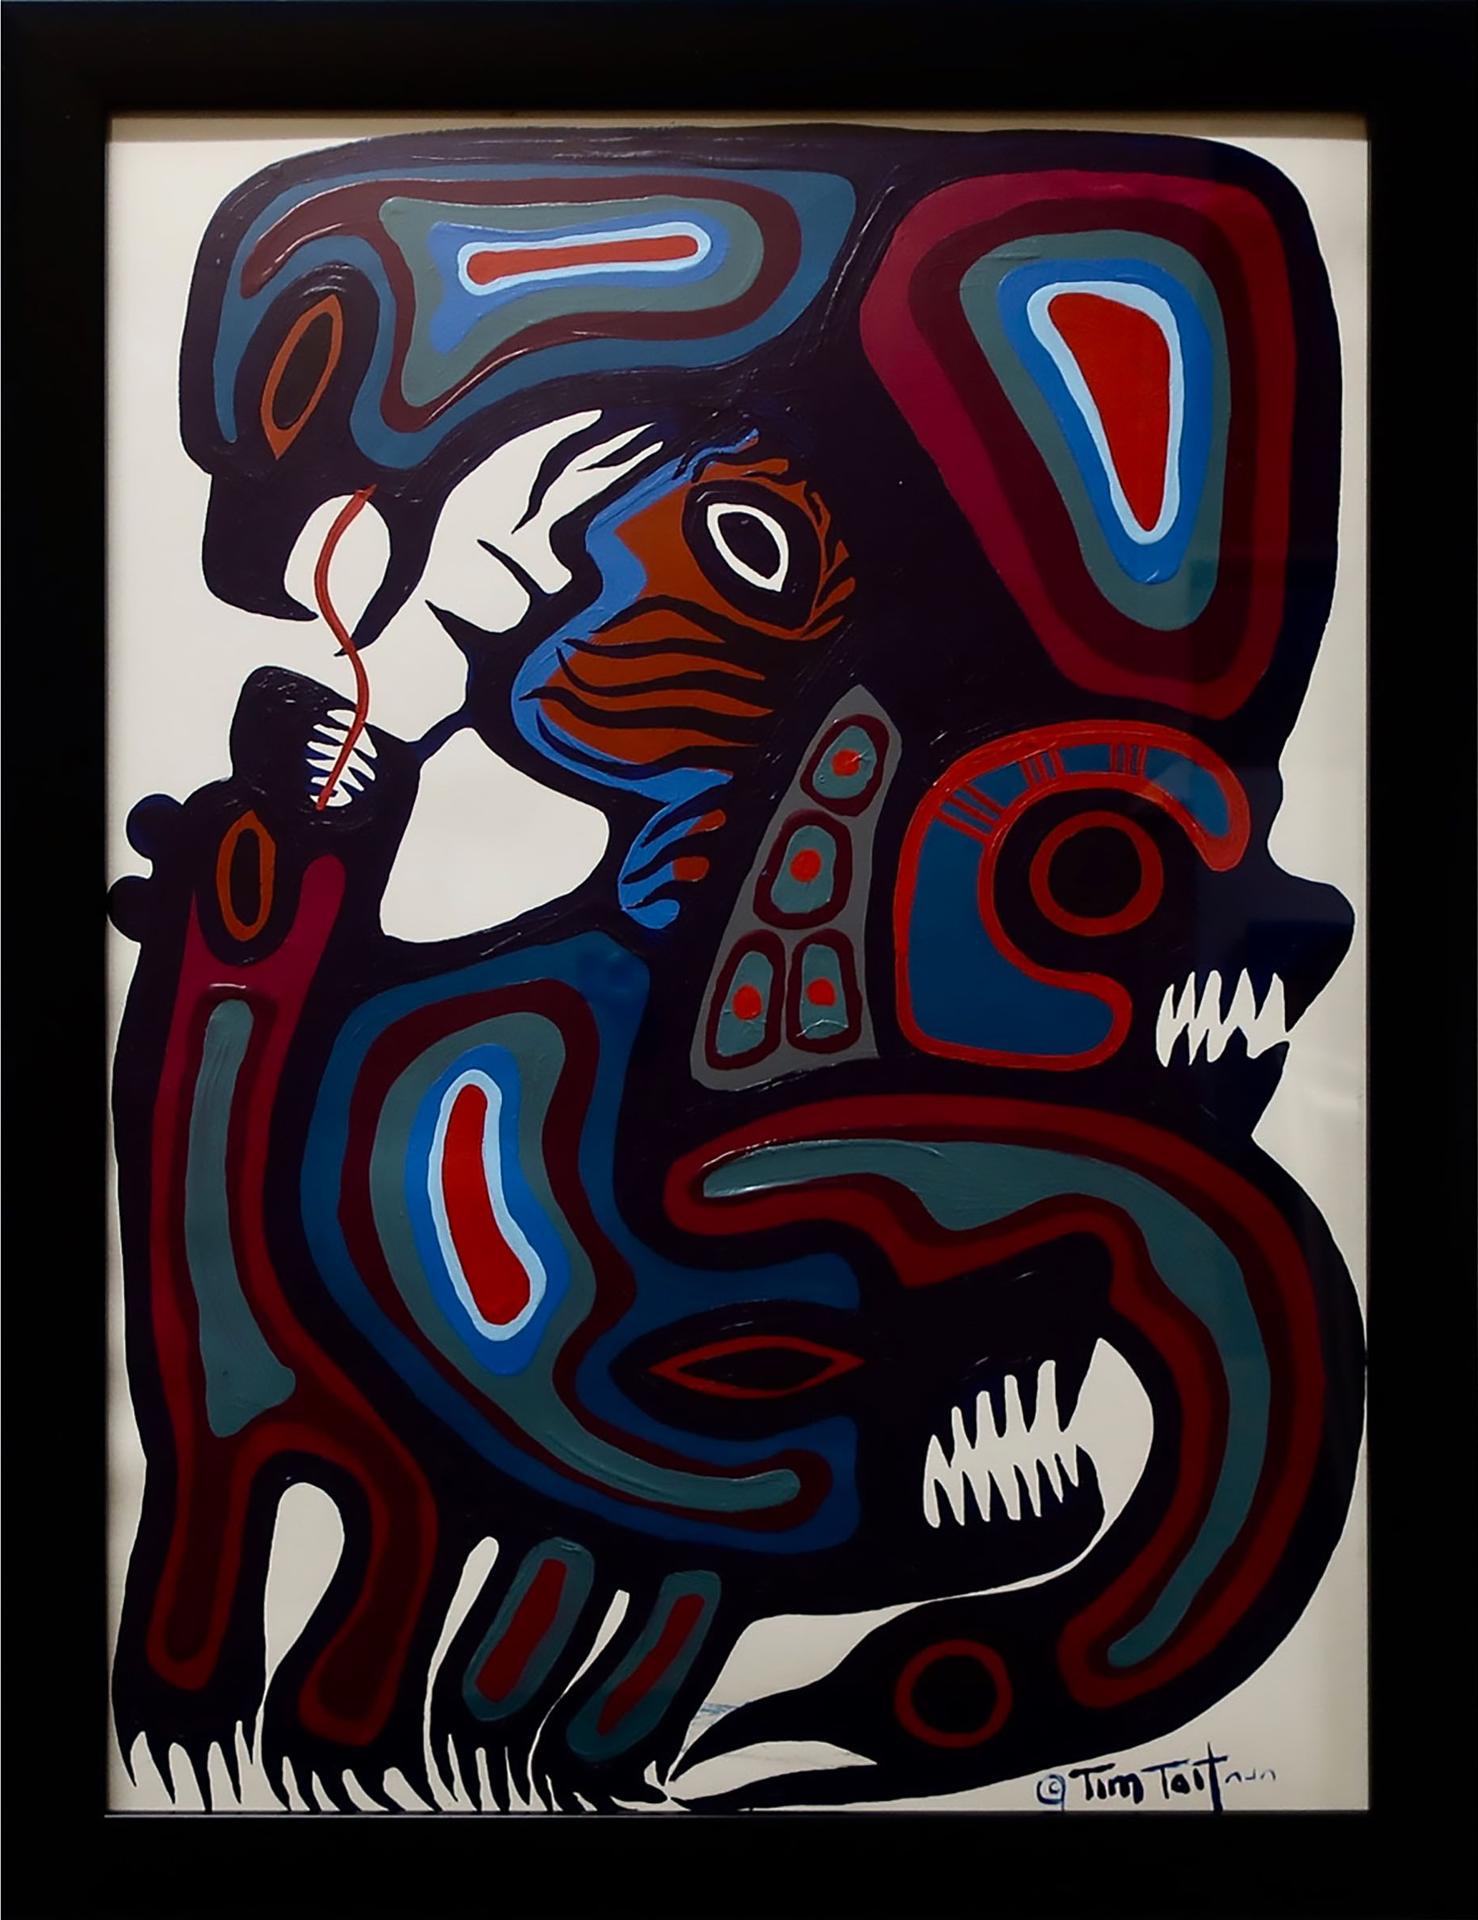 Tim Tait (1970) - Untitled (Shaman With Bears And Birds)